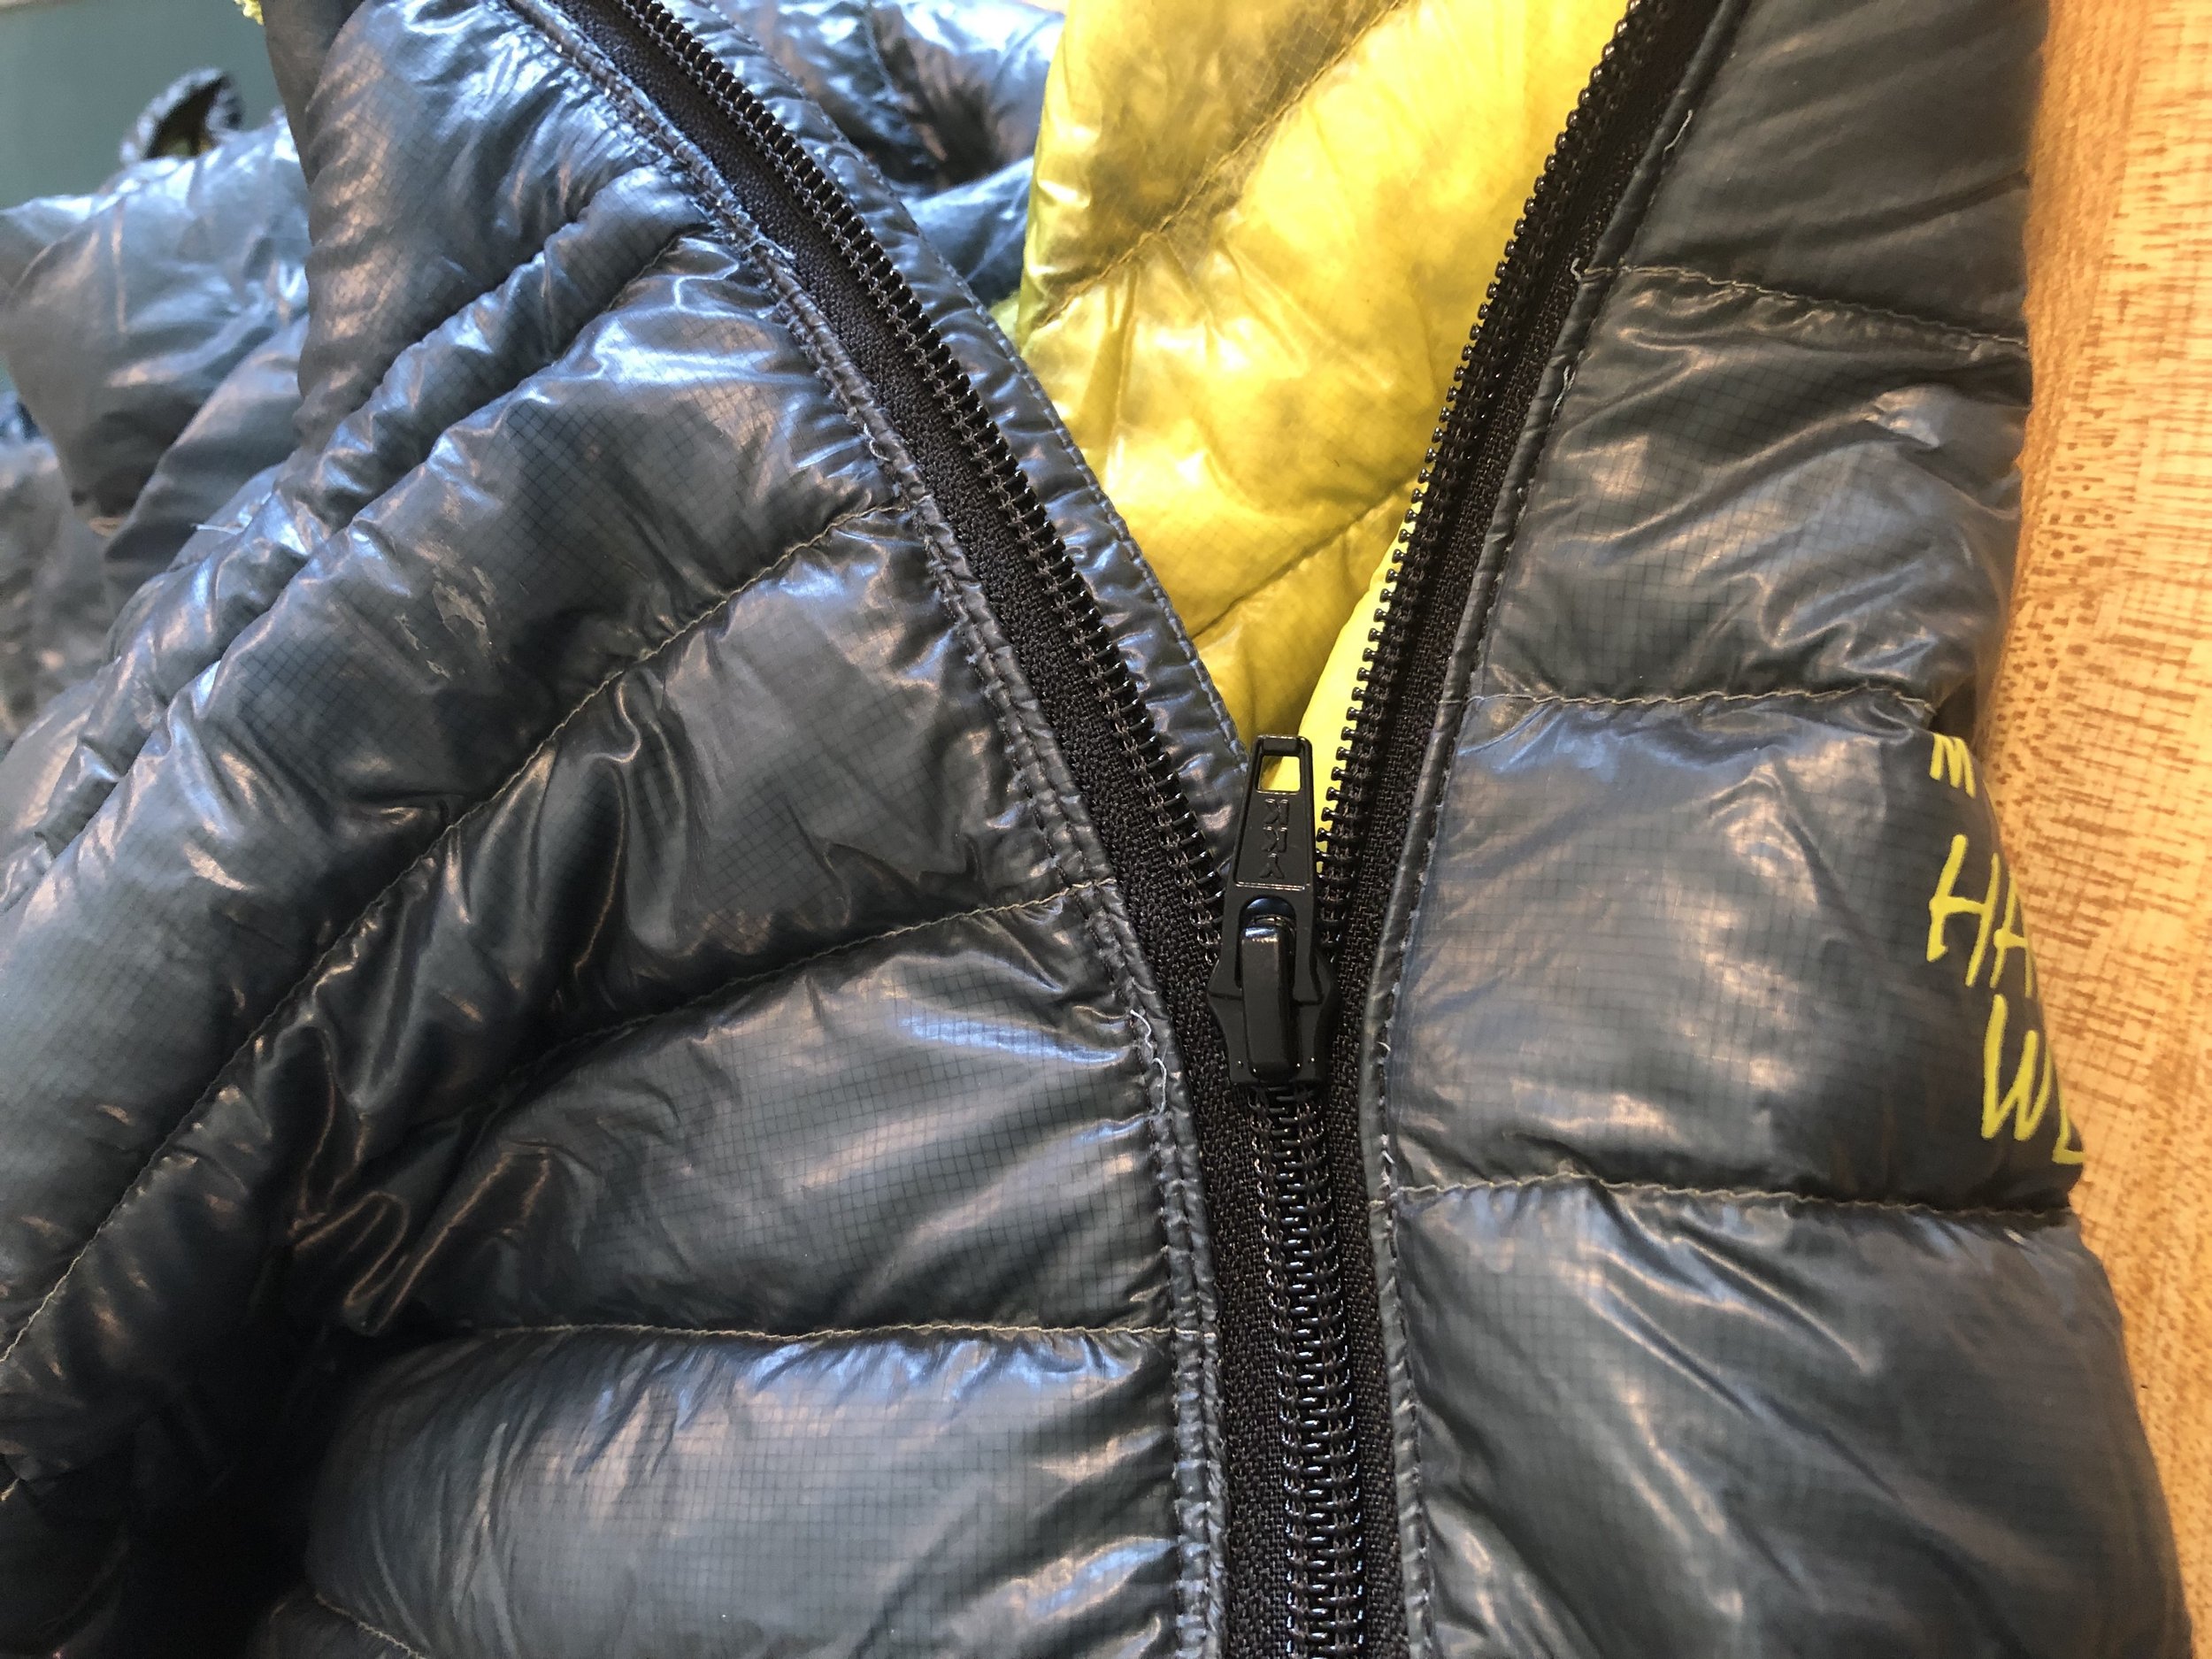 Rab  How To Patch Repair A Down Jacket 